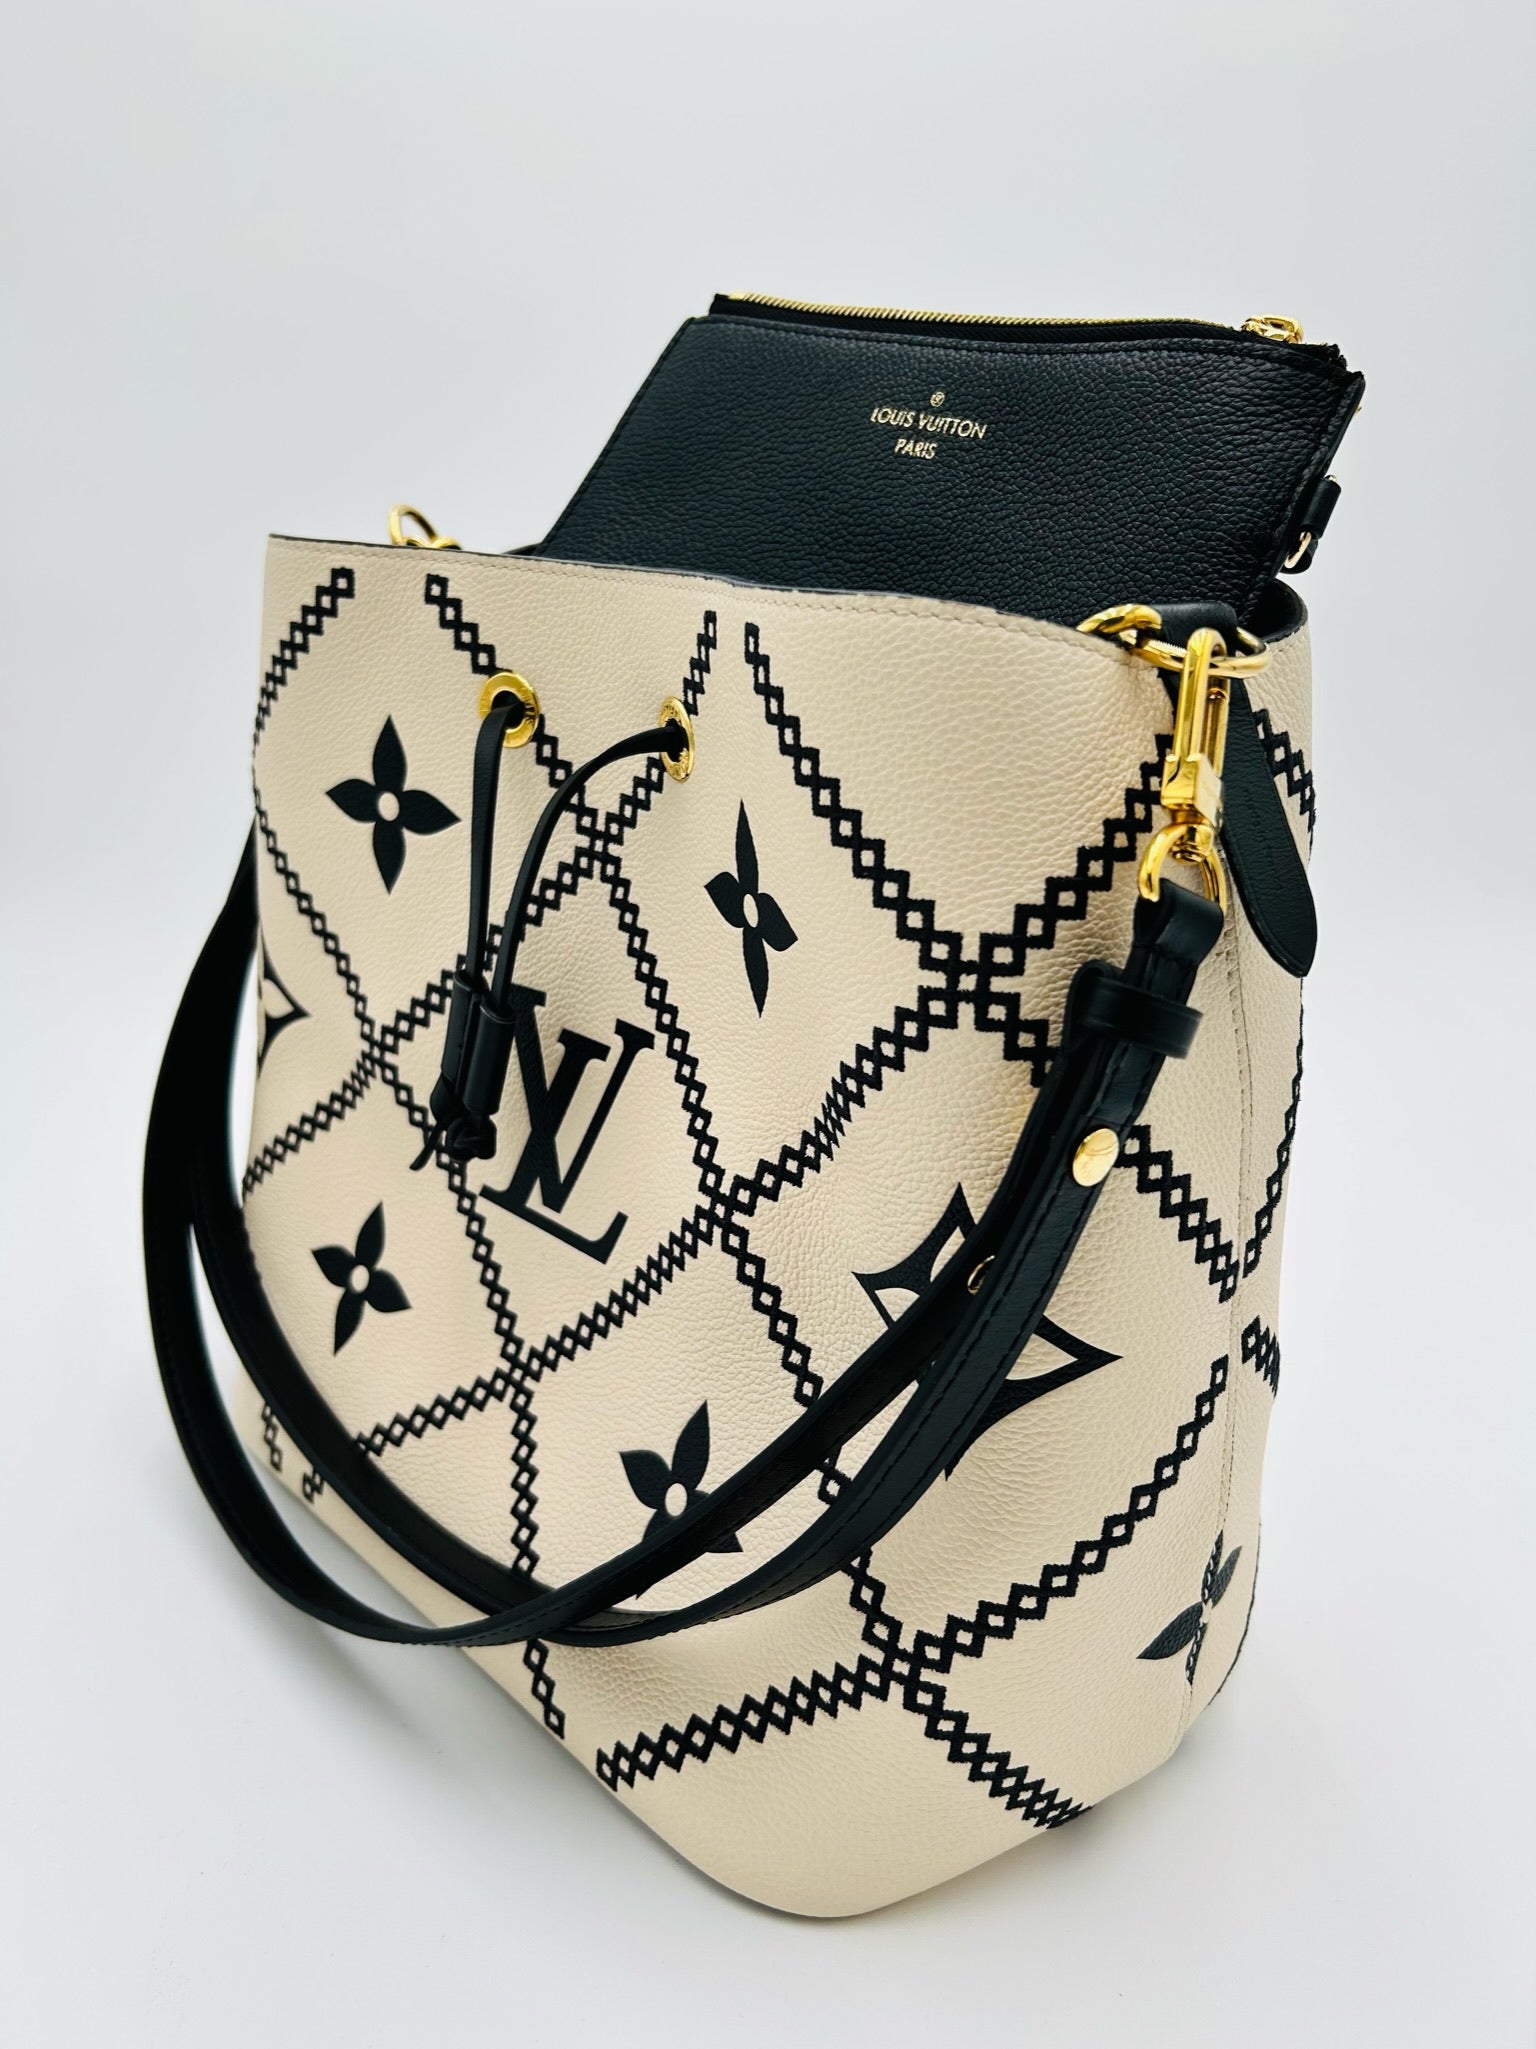 LV NEONOE SPECIAL EDITION OFFWHITE WITH BLACK LOGO